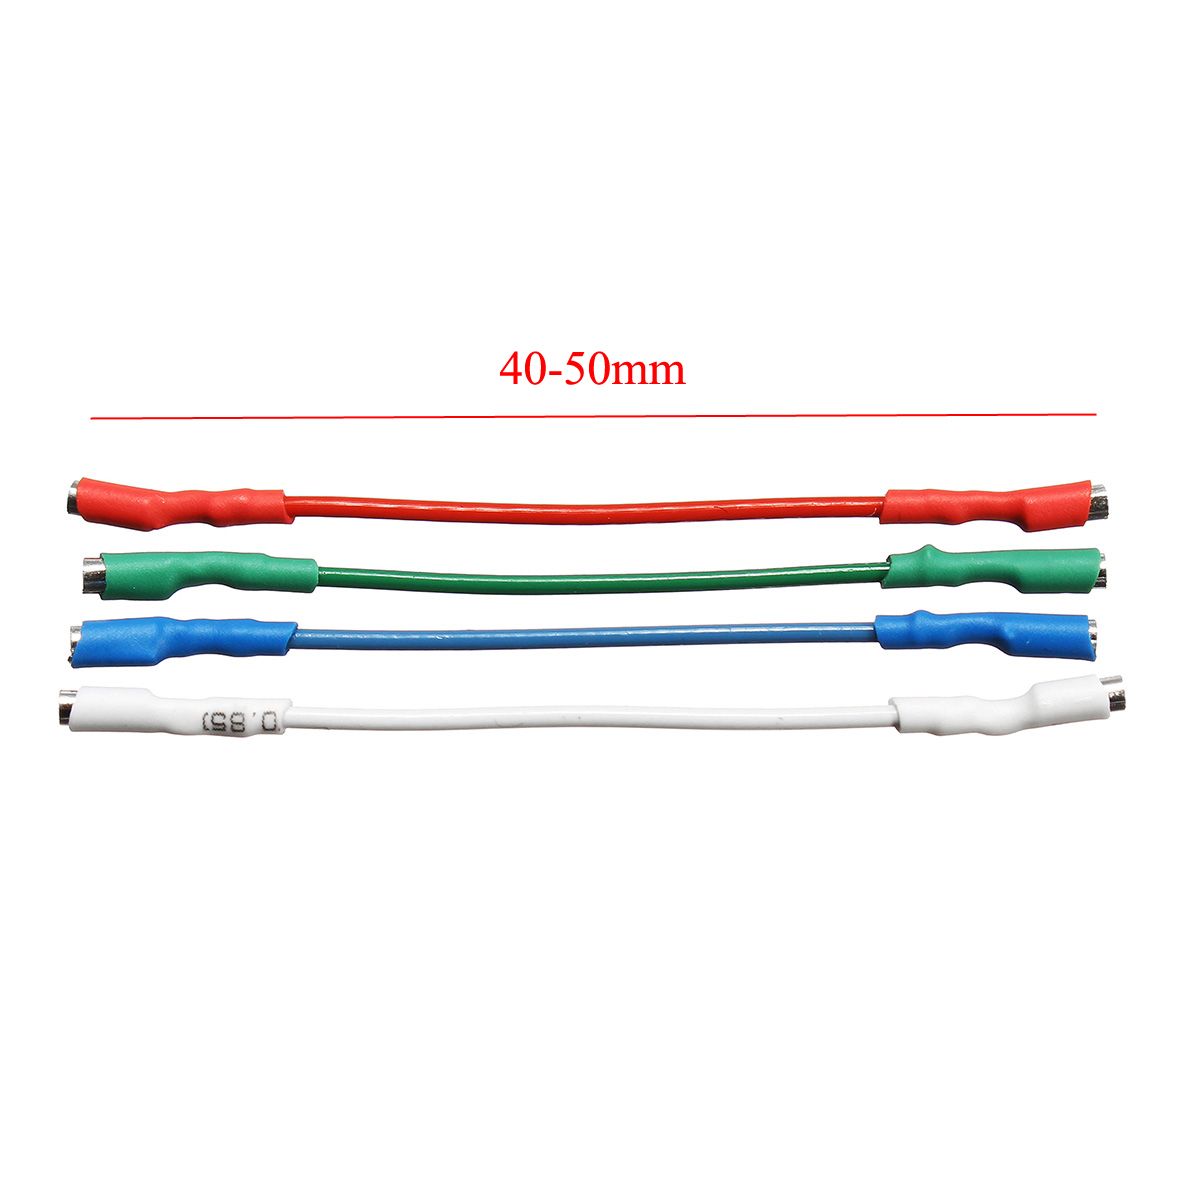 4Pcs-7N-Oxygen-Free-Copper-Wire-Leads-Header-Cable-OFC-For-120---130mm-Pins-1439189